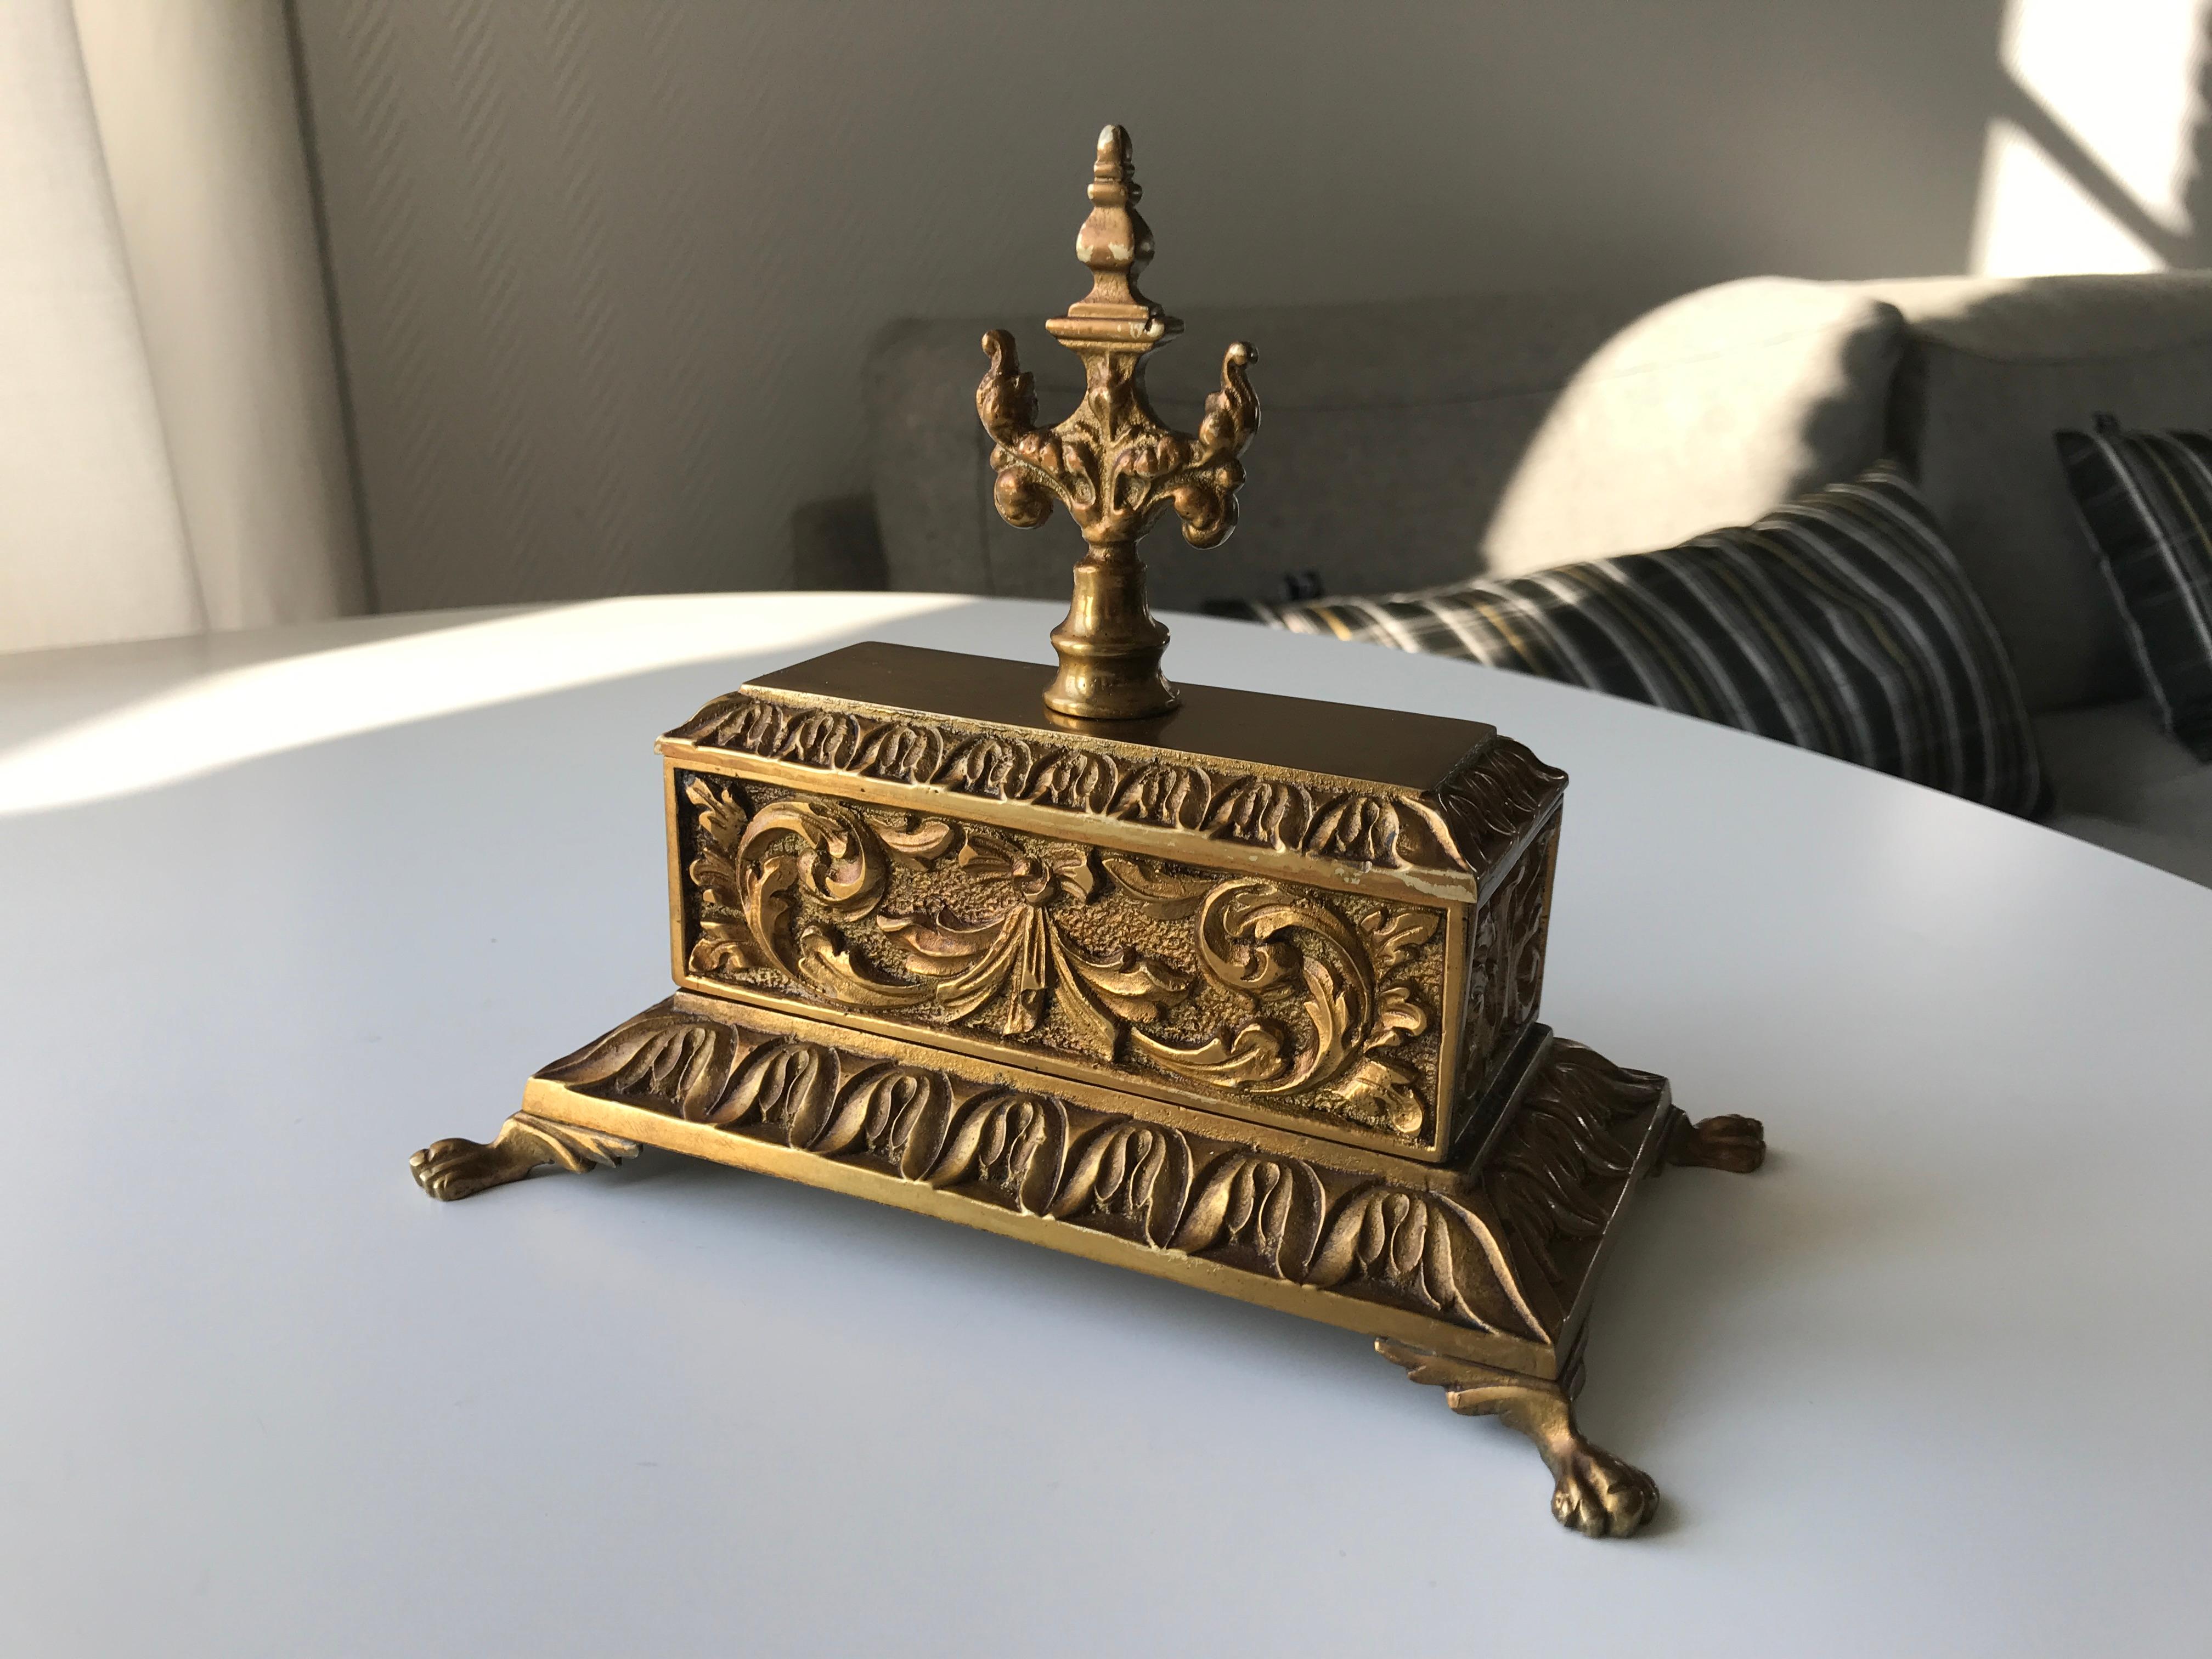 FREE SHIPPING! SARCOPHAGUS Baroque style jewelry or clock box in brass resting on four beast legs. Richly ornamental design on all four sides as well as on top with a spire. Inlay in wood with green textile cover on sides. Not only for your fine